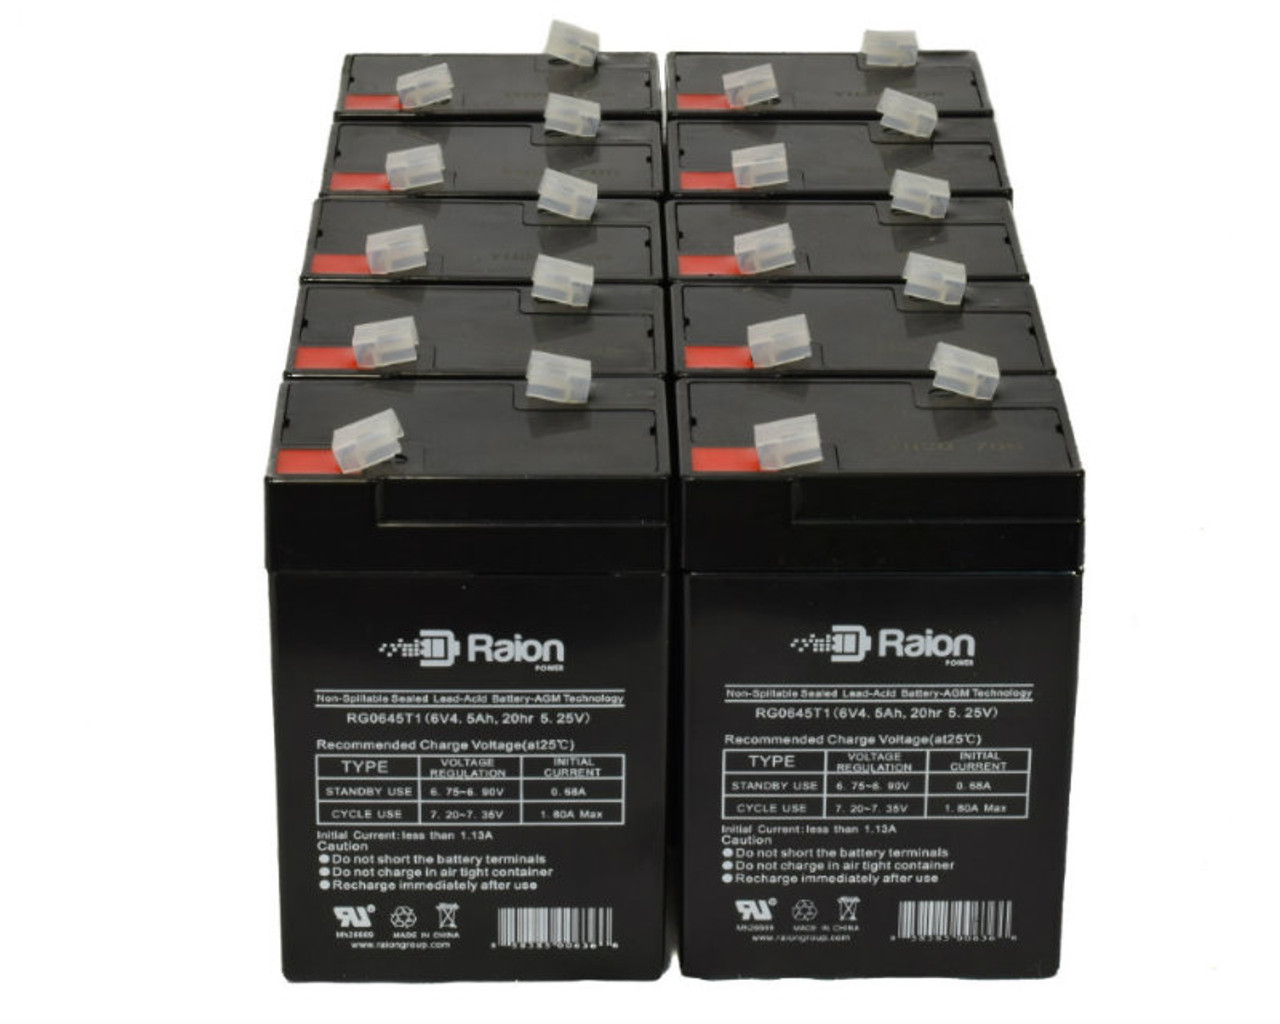 Raion Power 6 Volt 4.5Ah RG0645T1 Replacement Battery for HRX 6-4 - 10 Pack